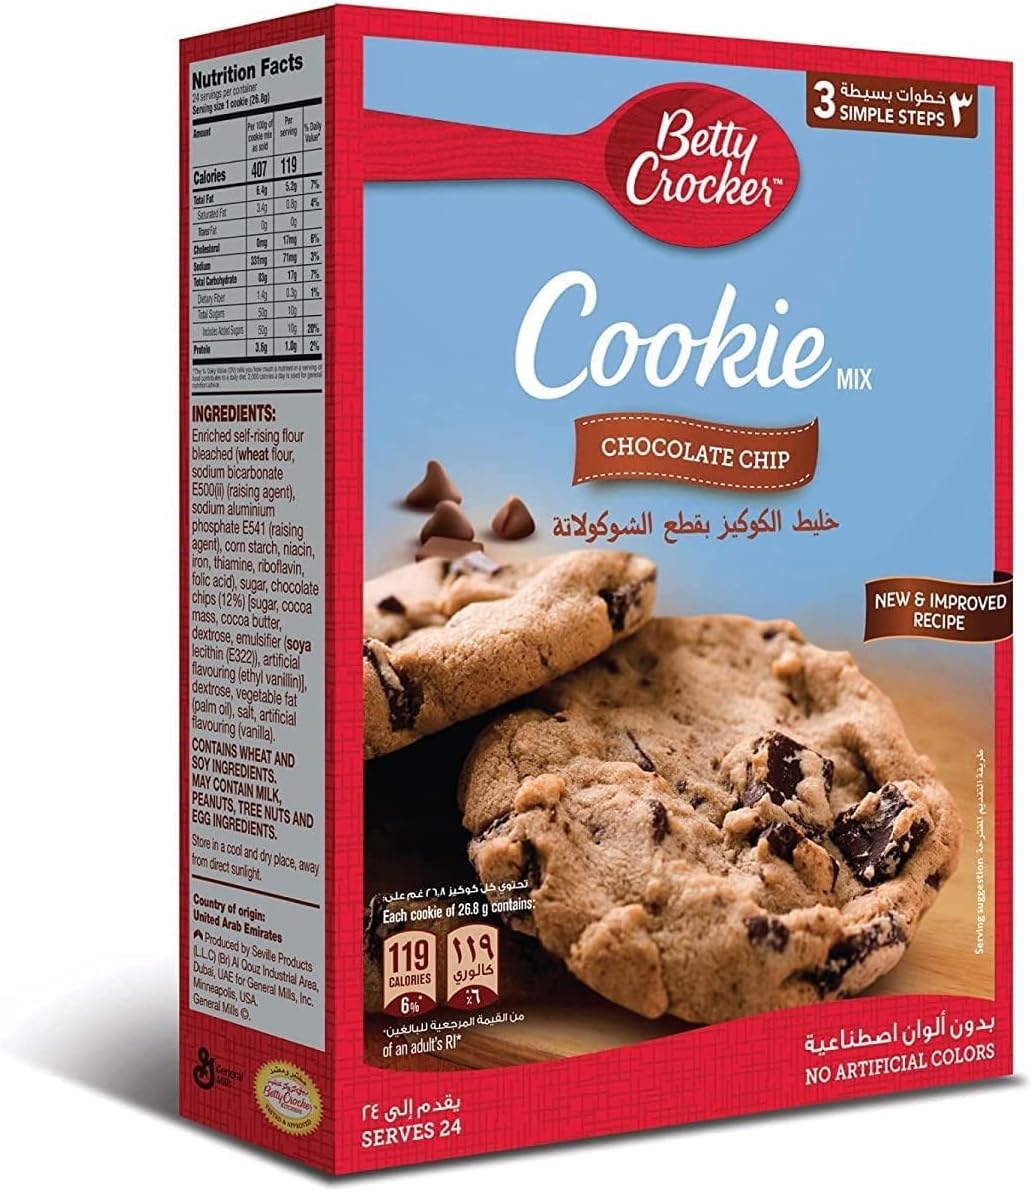 Betty Crocker Chocolate Chip Cookie Mix, 496g - Pack of 1